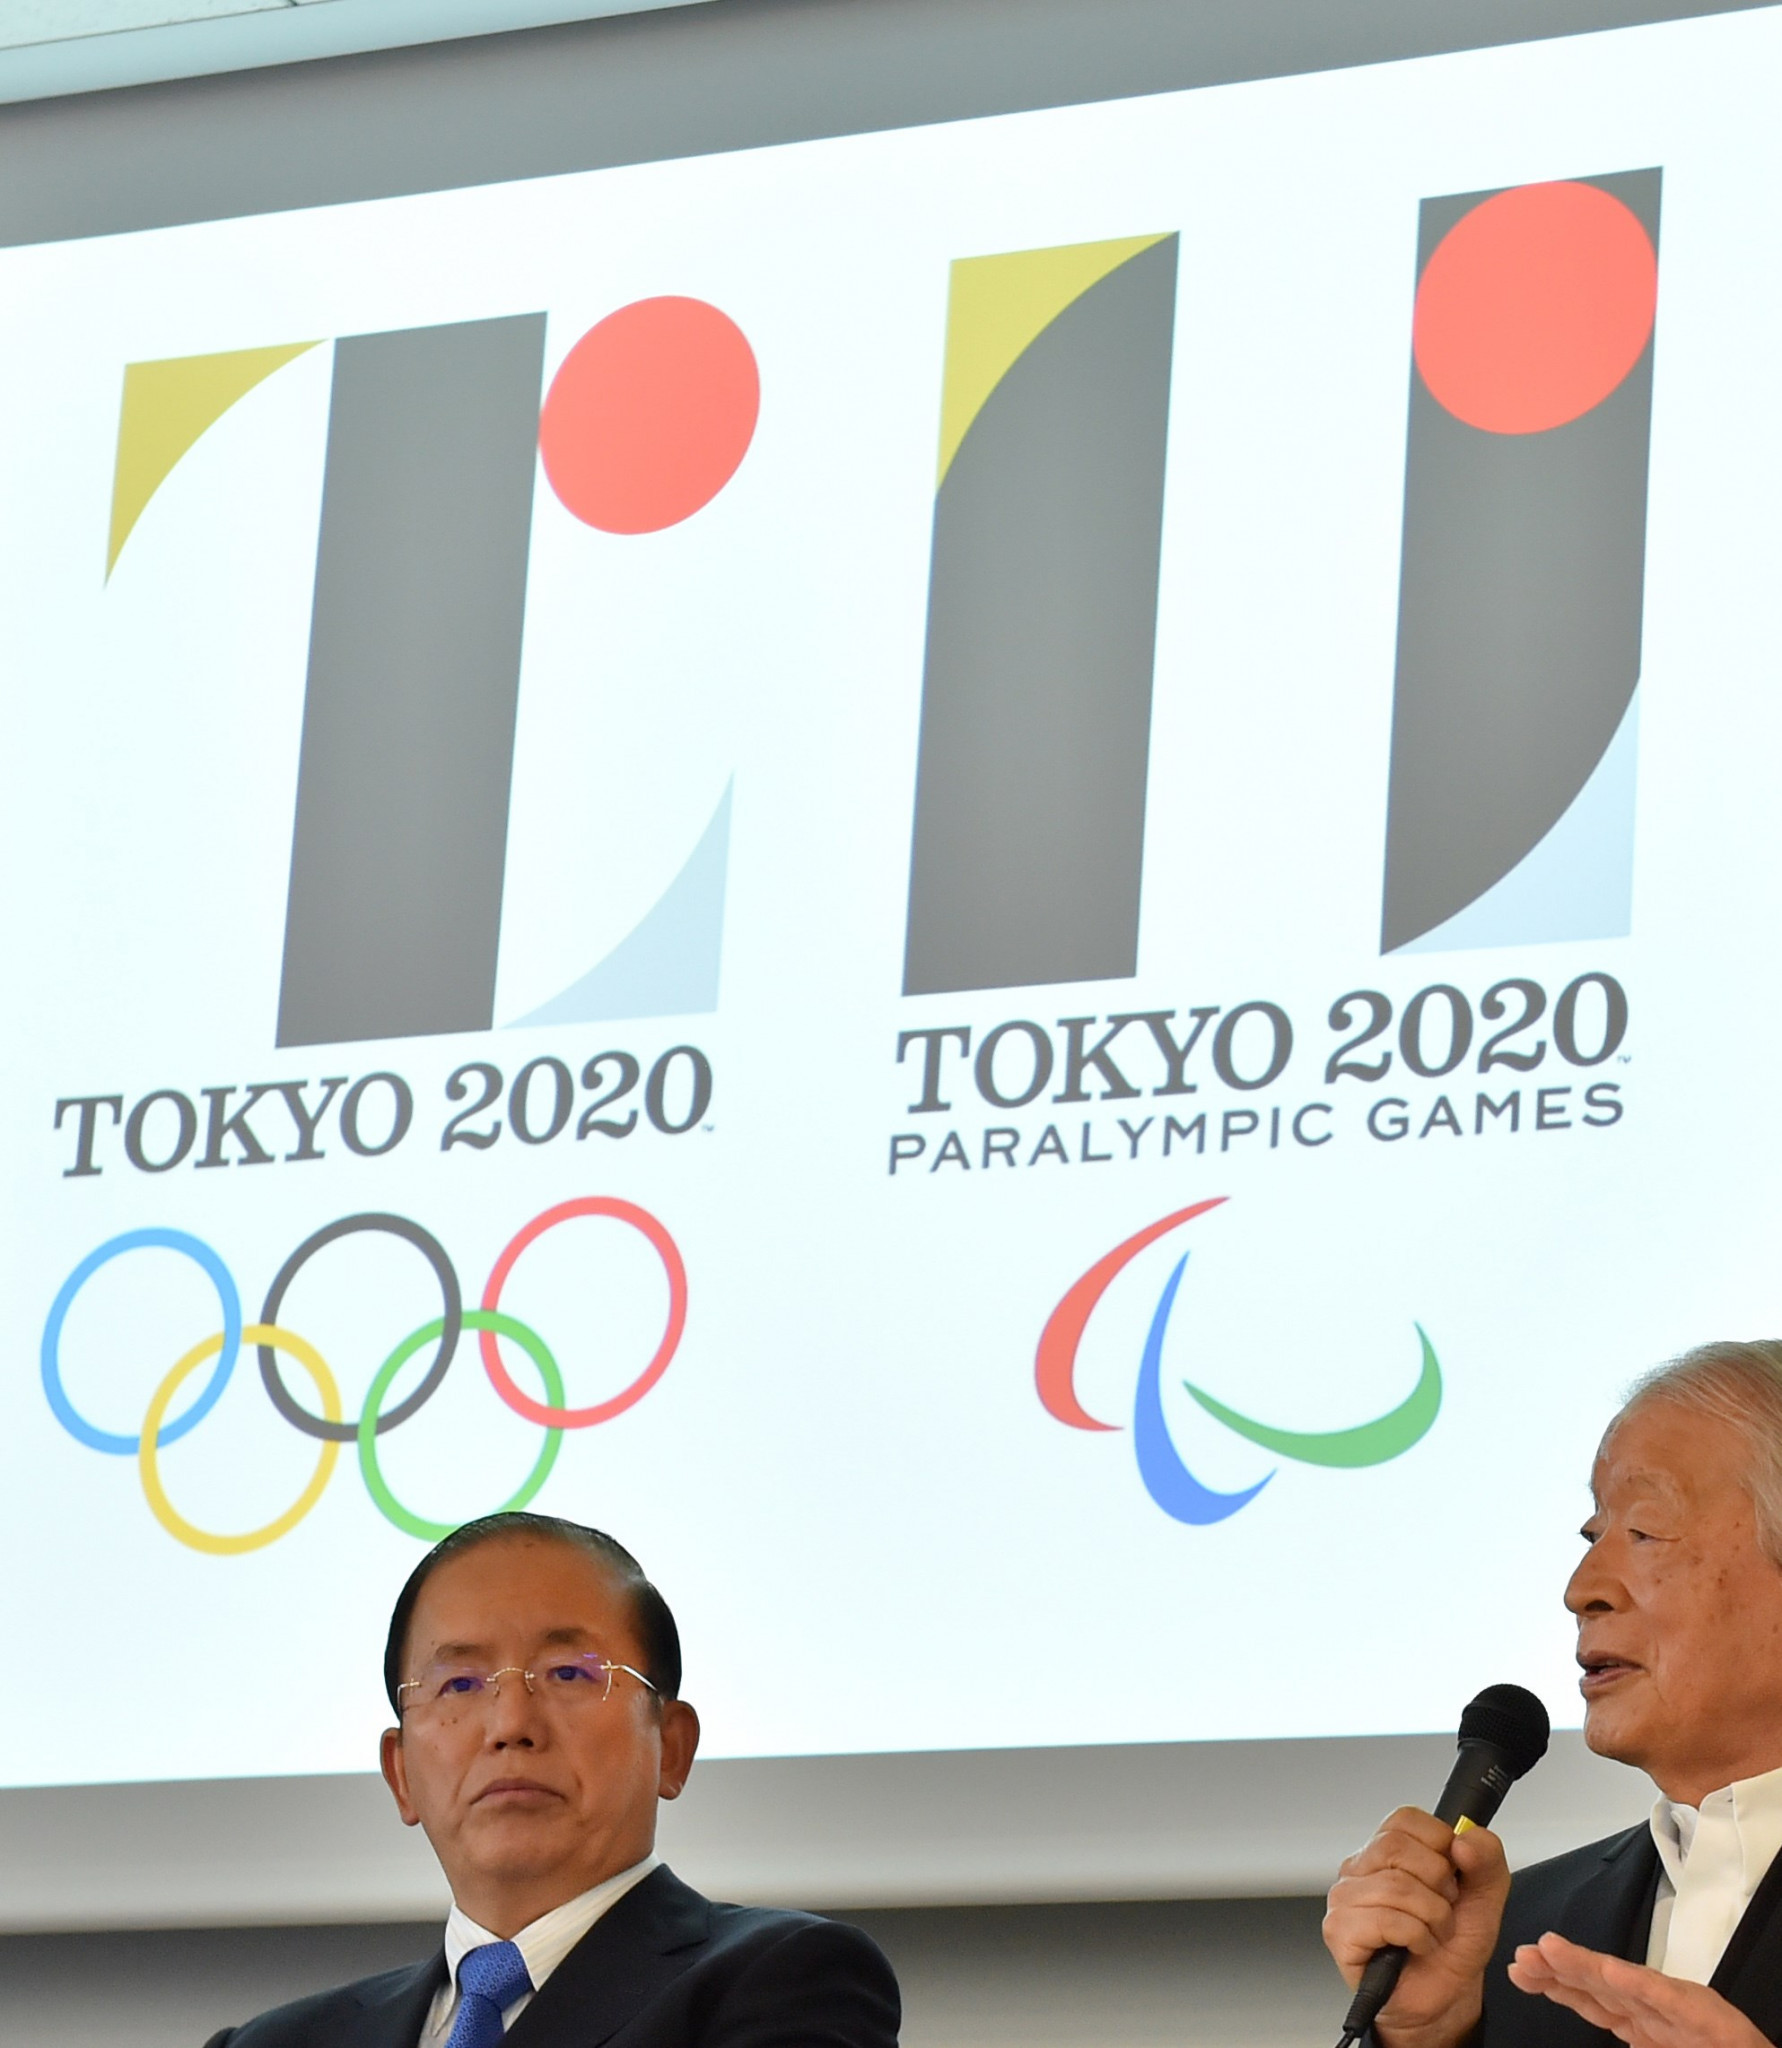 Tokyo 2020 hope Paralympics can make Japan more accessible place 